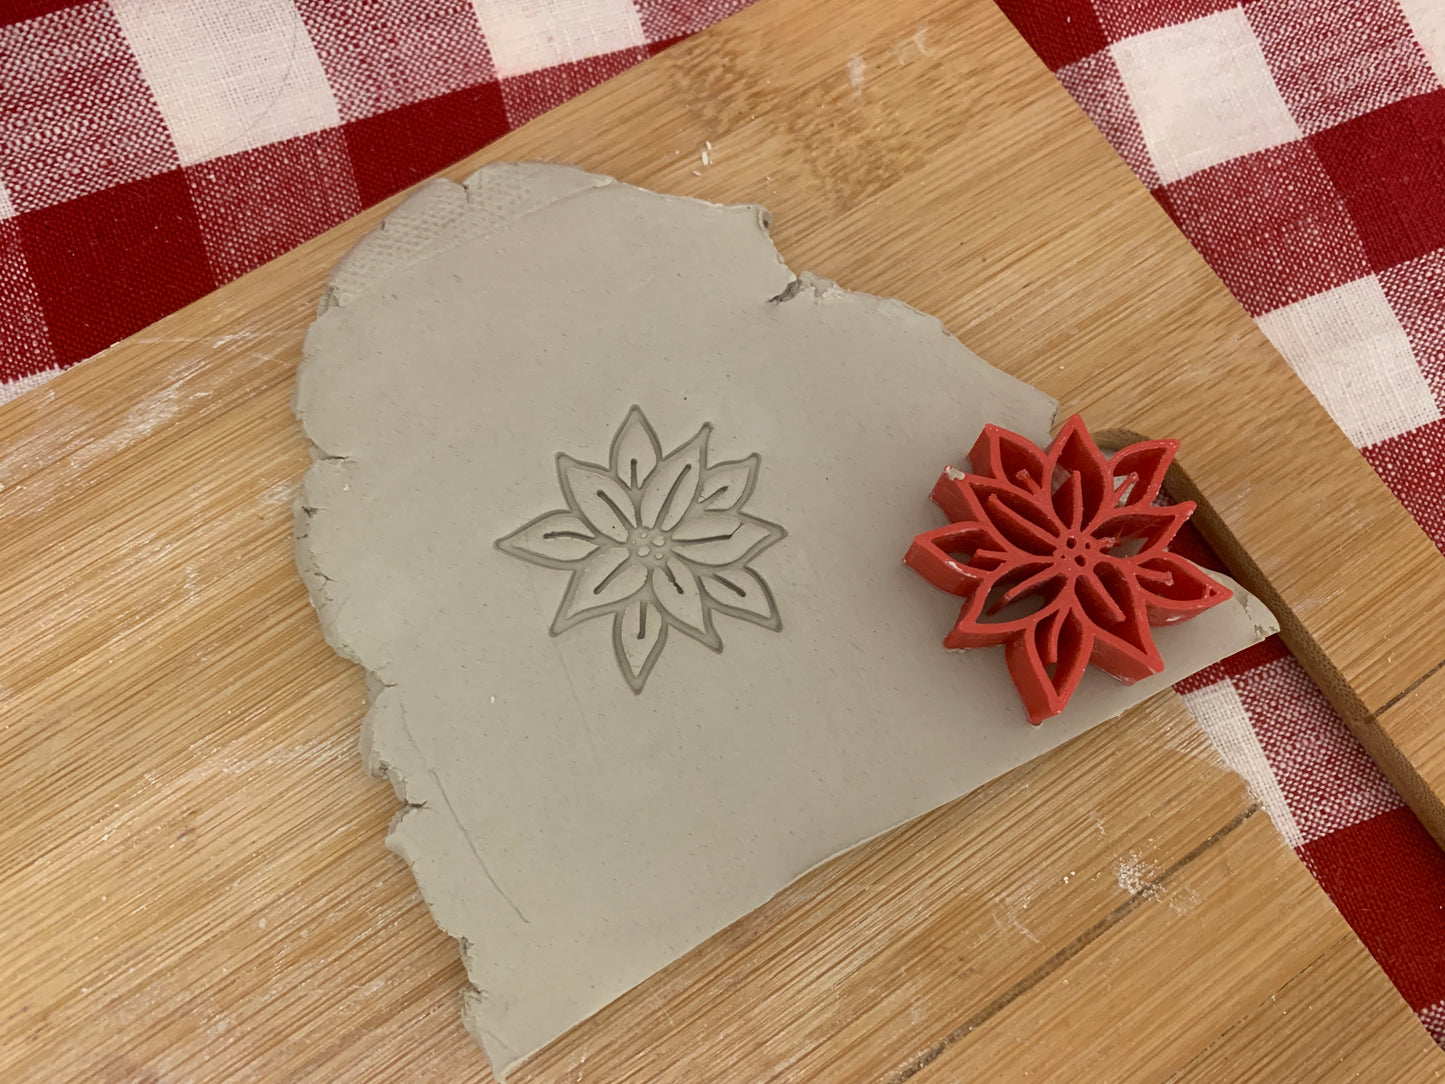 Poinsettia Design, Pottery Stamp or Stencil w/ optional cutter - plastic 3d printed, multiple sizes available